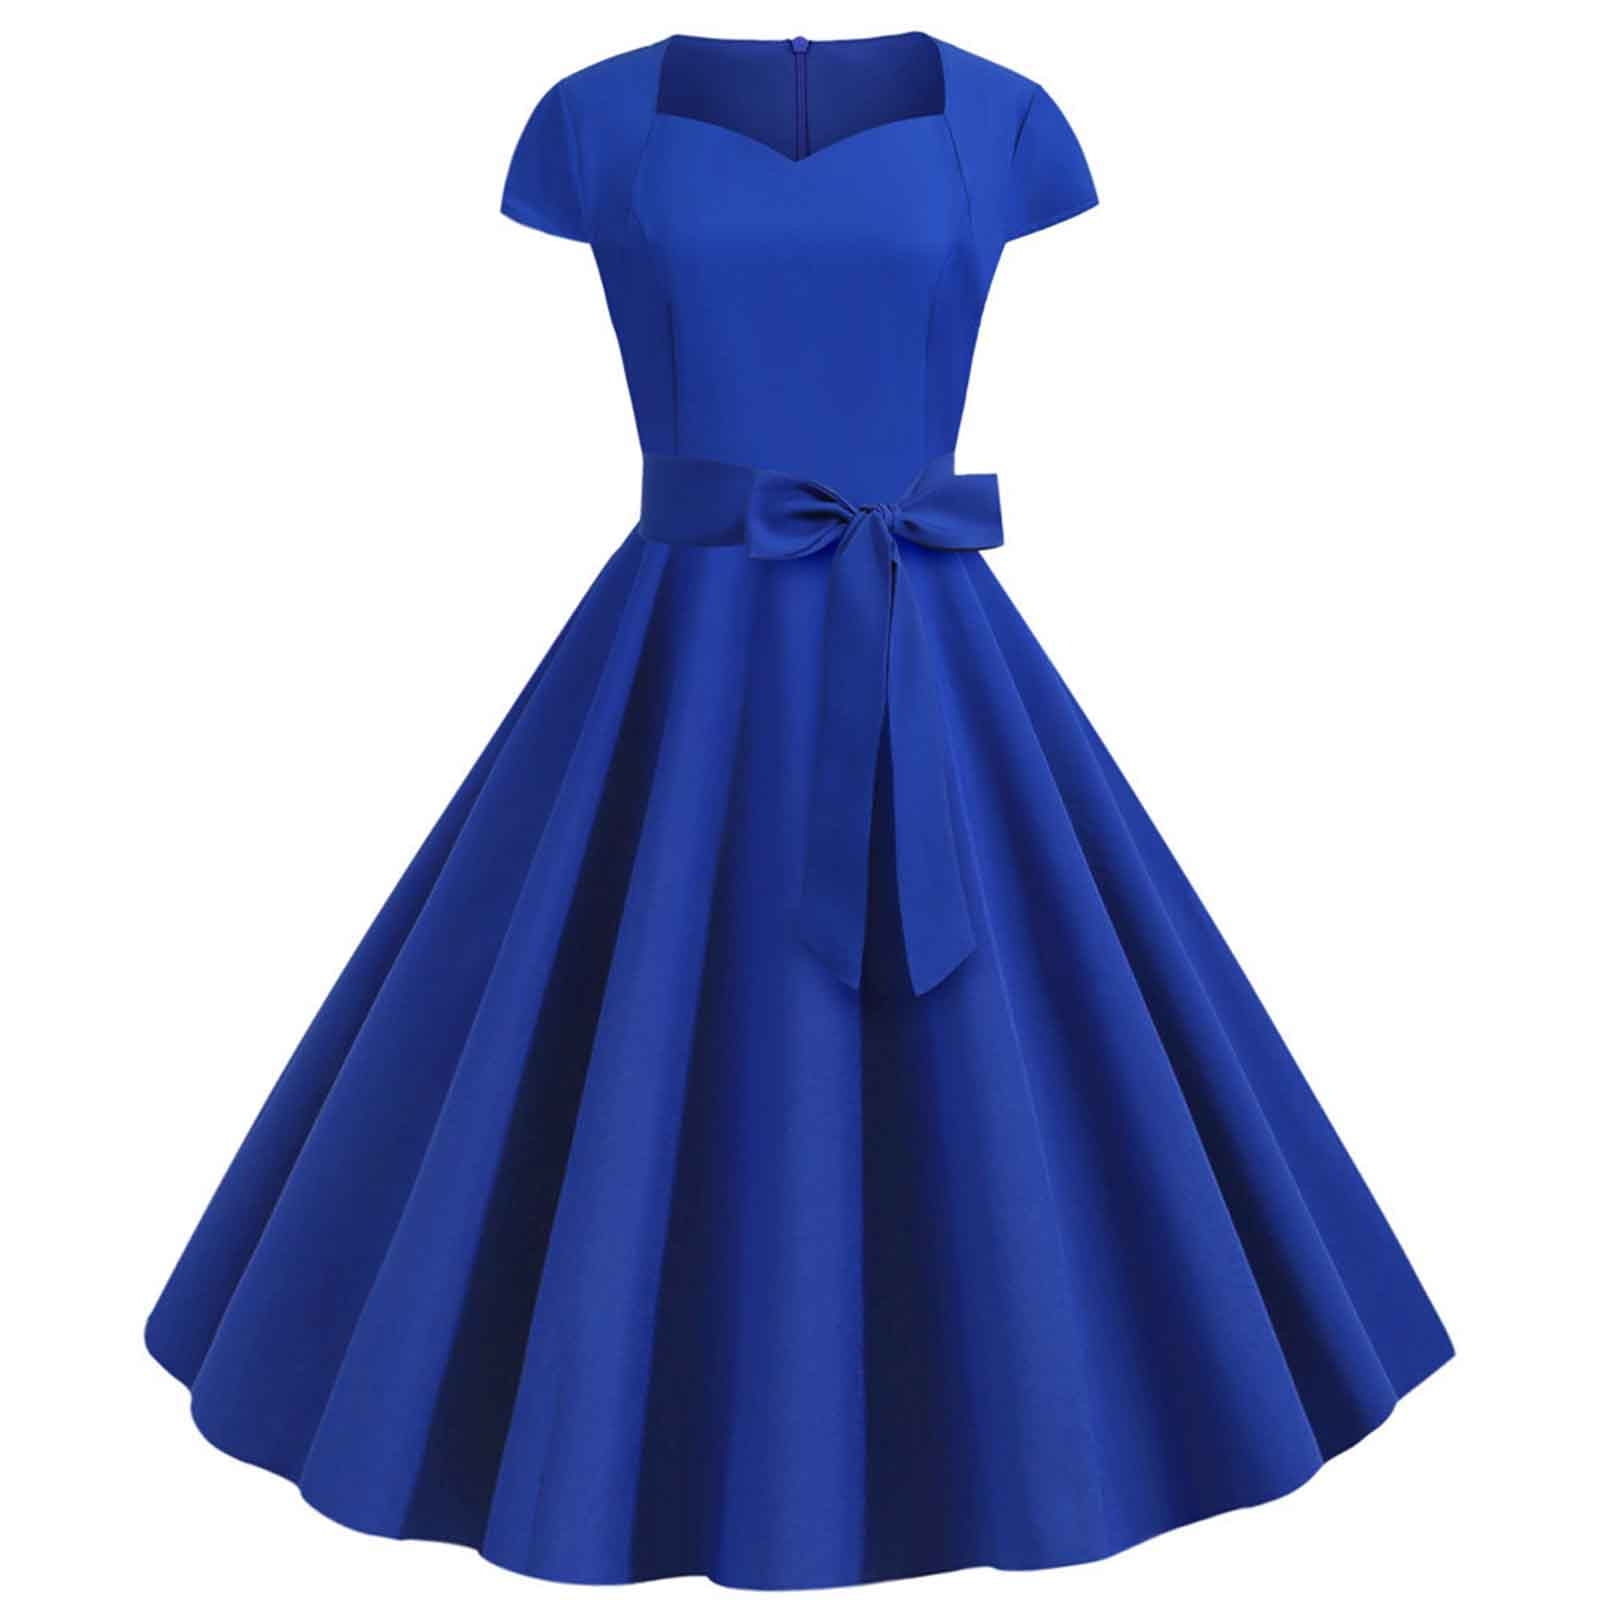 BEEYASO Clearance Summer Dresses for Women Short Short Sleeve Fashion  A-Line Solid Scoop Neck Dress Blue m 